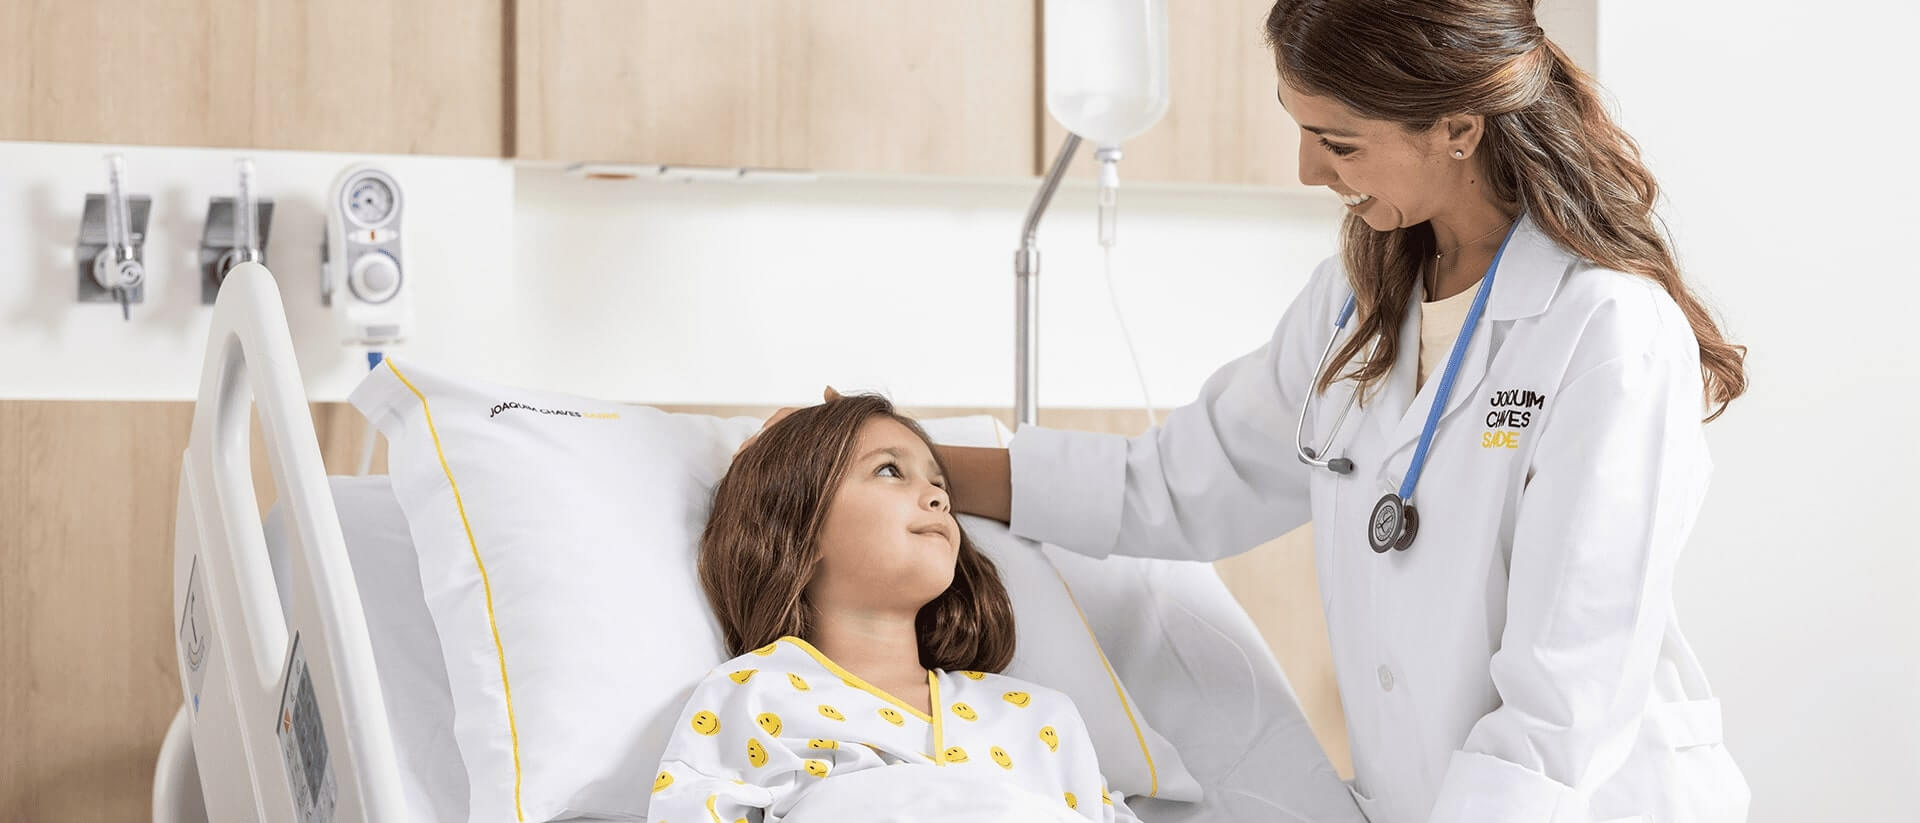 A pediatric doctor standing and a patient in a hospital bed